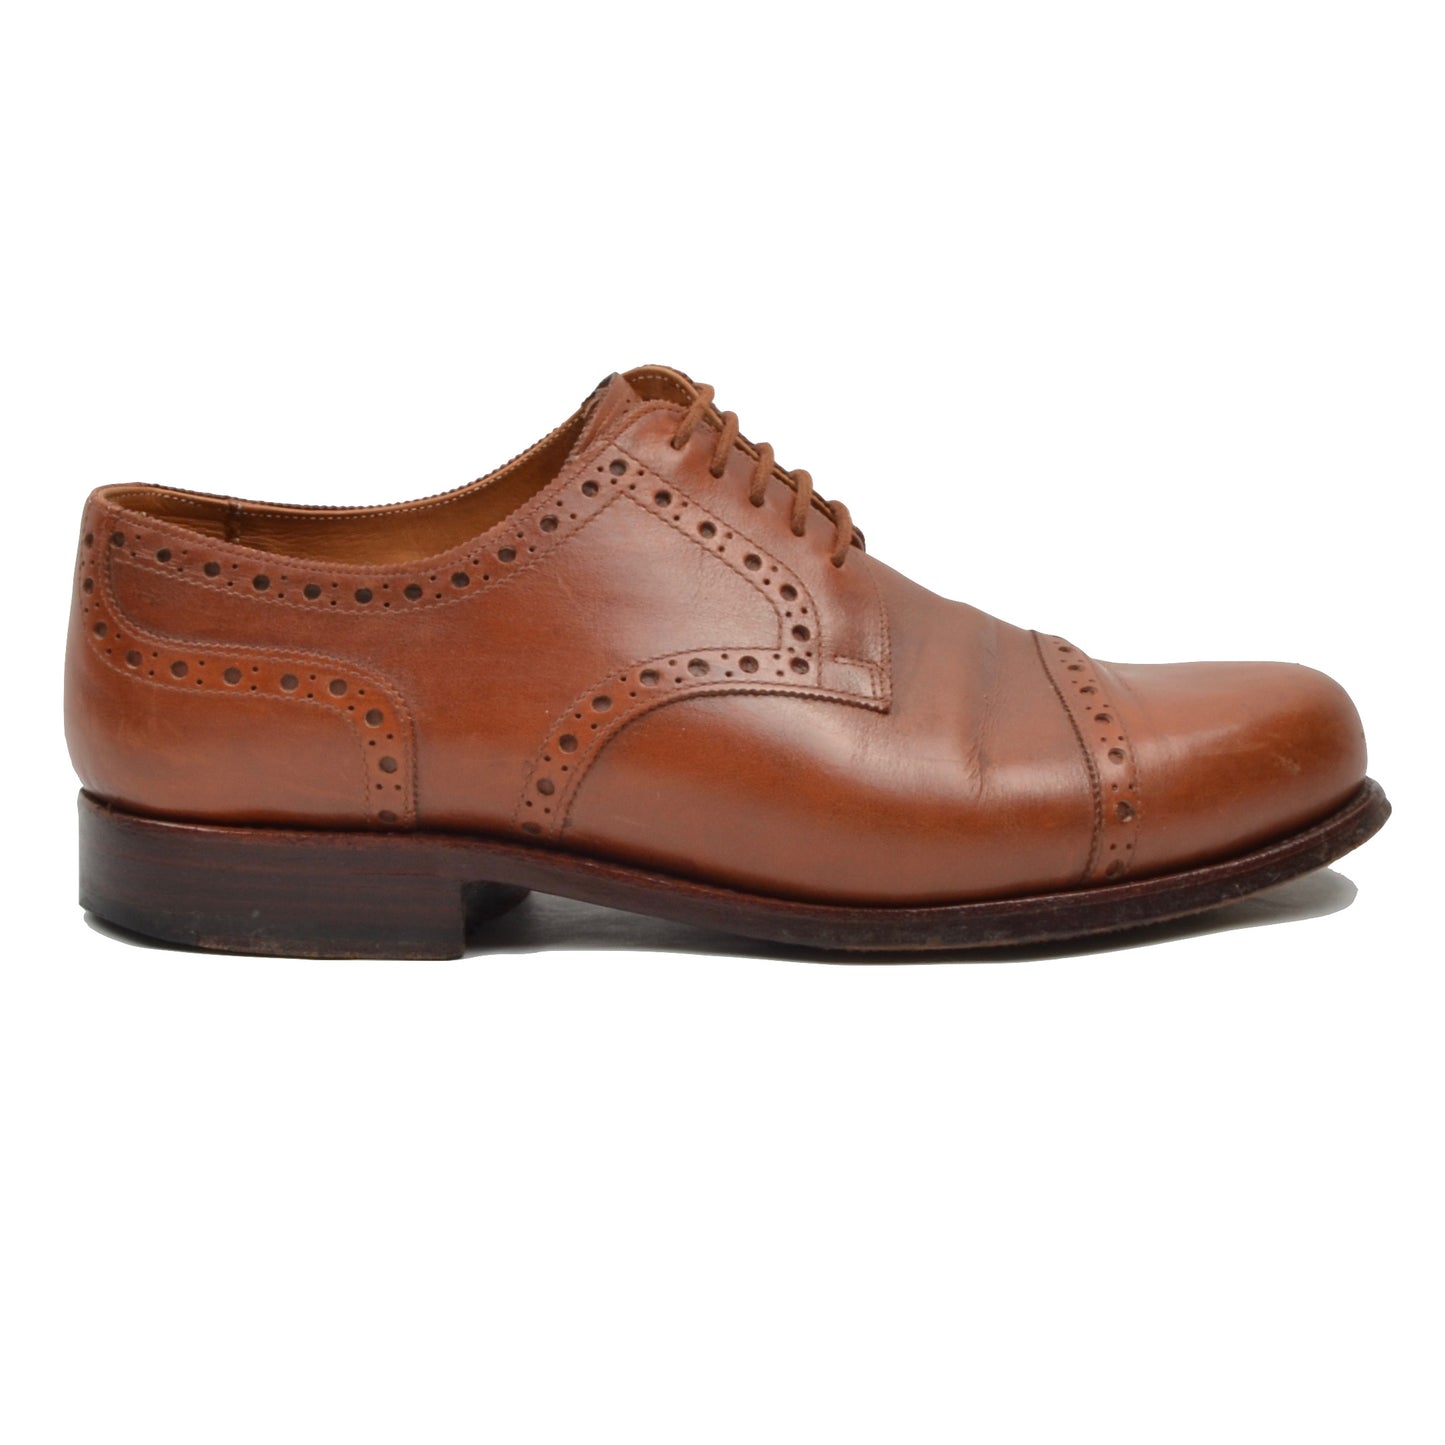 Ludwig Reiter Budapester Shoes Size 8.5 - Cognac